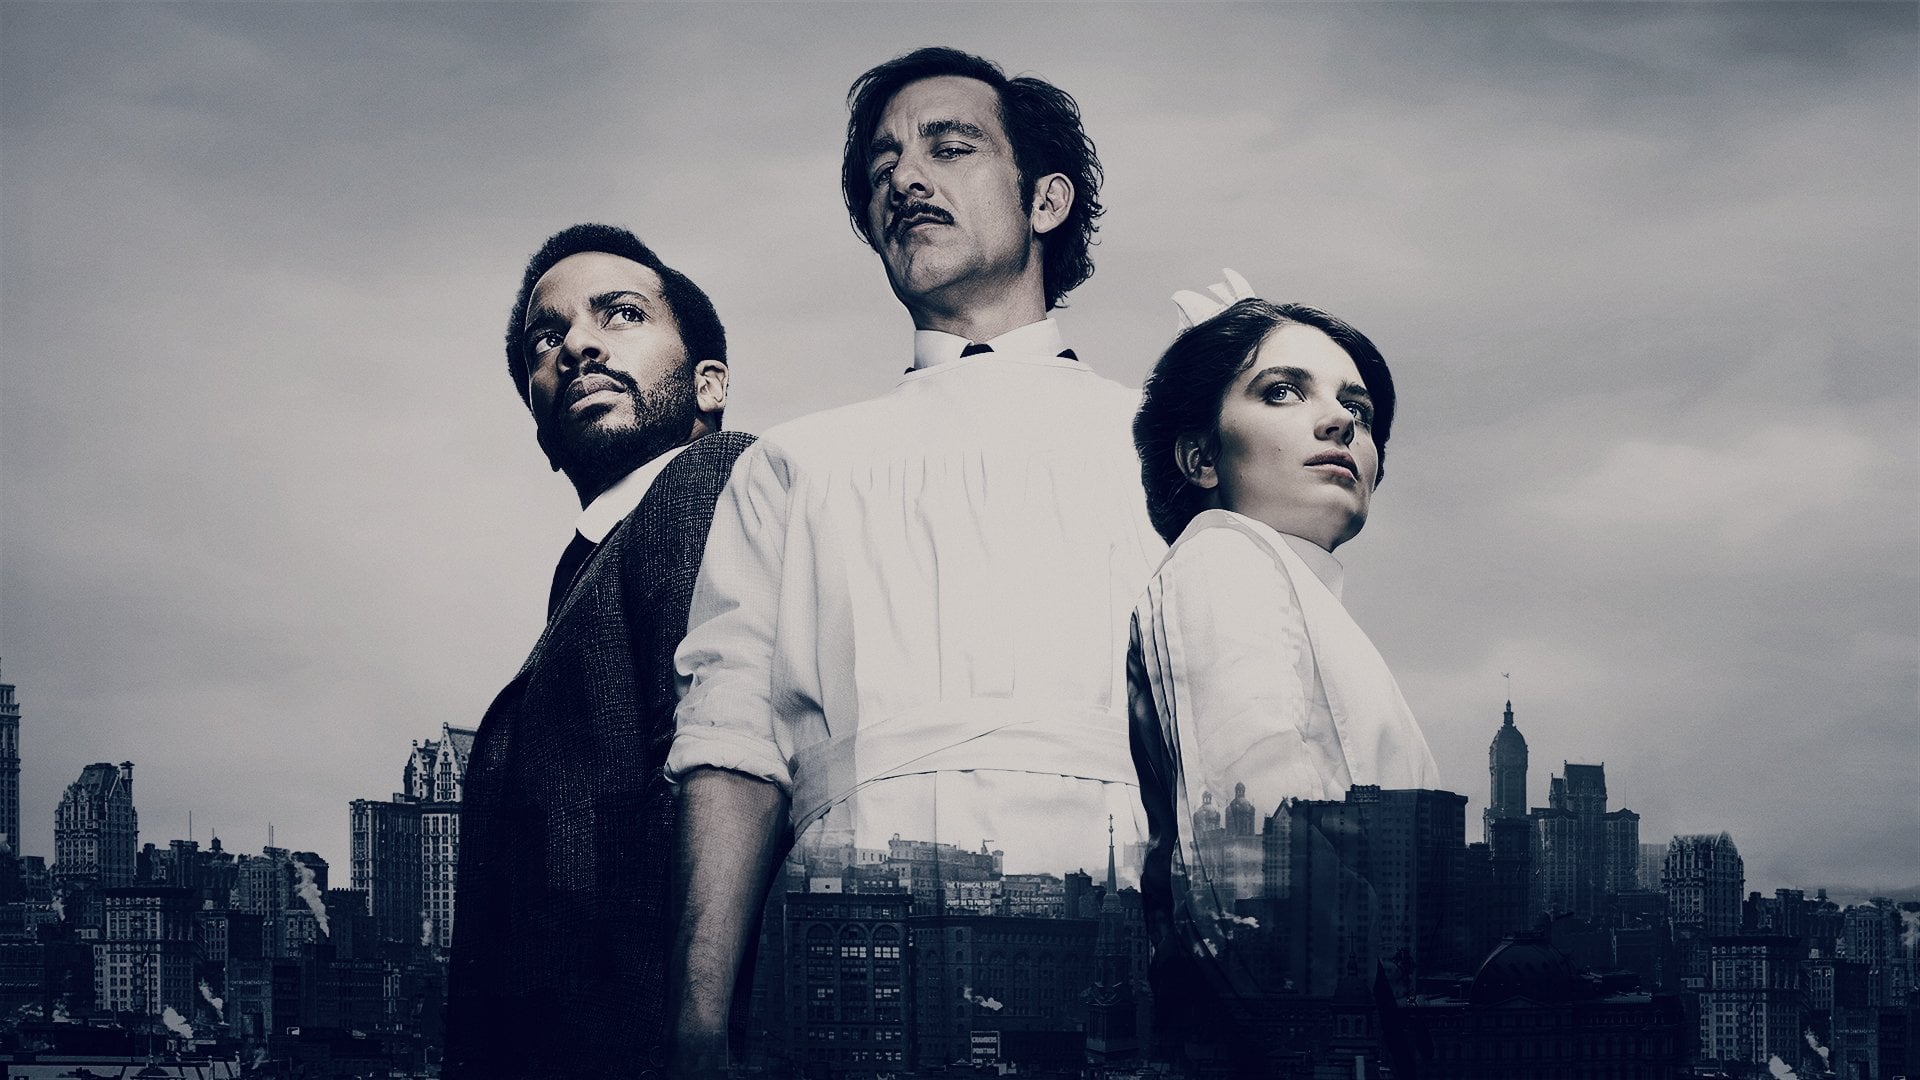 The Knick 2014 123movies